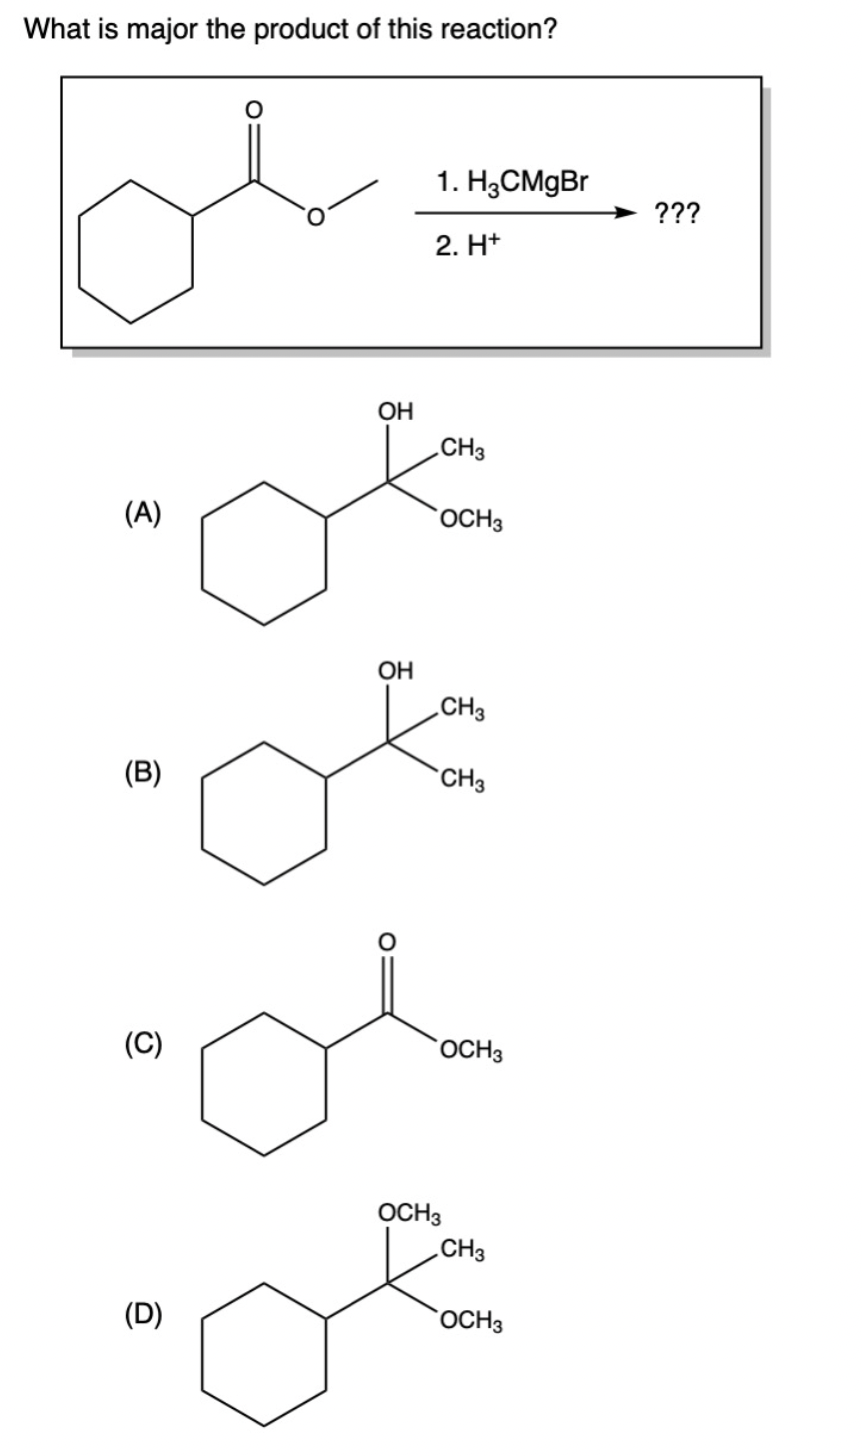 What is major the product of this reaction?
(A)
(B)
(C)
(D)
OH
1. H3CMgBr
2. H+
CH3
OCH 3
OH
CH3
Of
CH3
OCH 3
OCH3
CH3
OCH 3
???